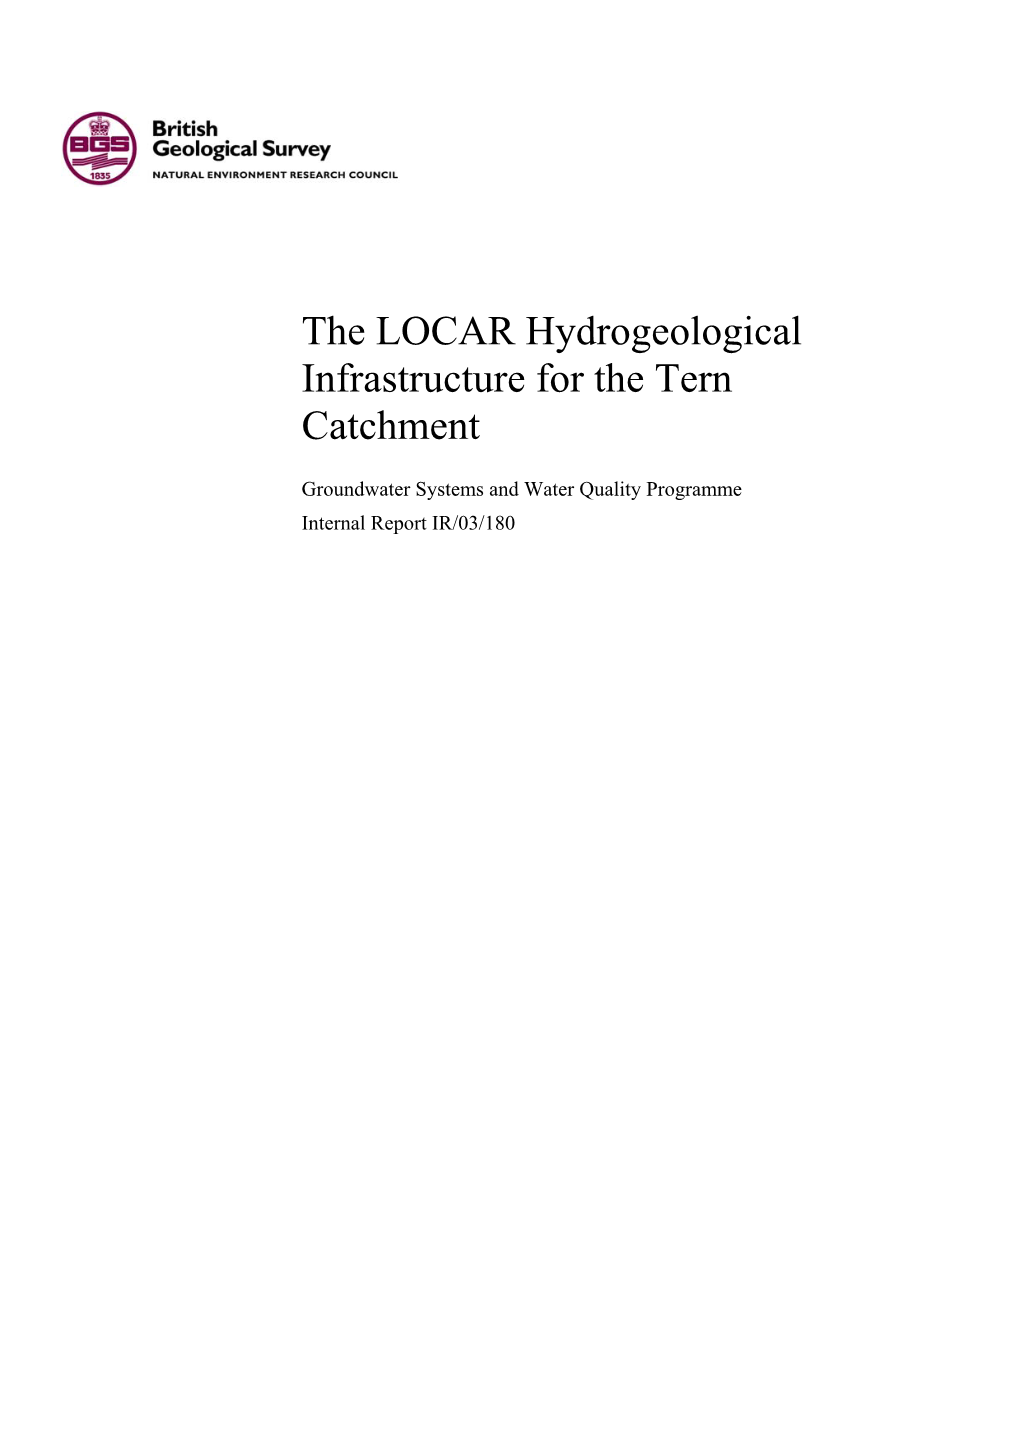 The LOCAR Hydrogeological Infrastructure for the Tern Catchment